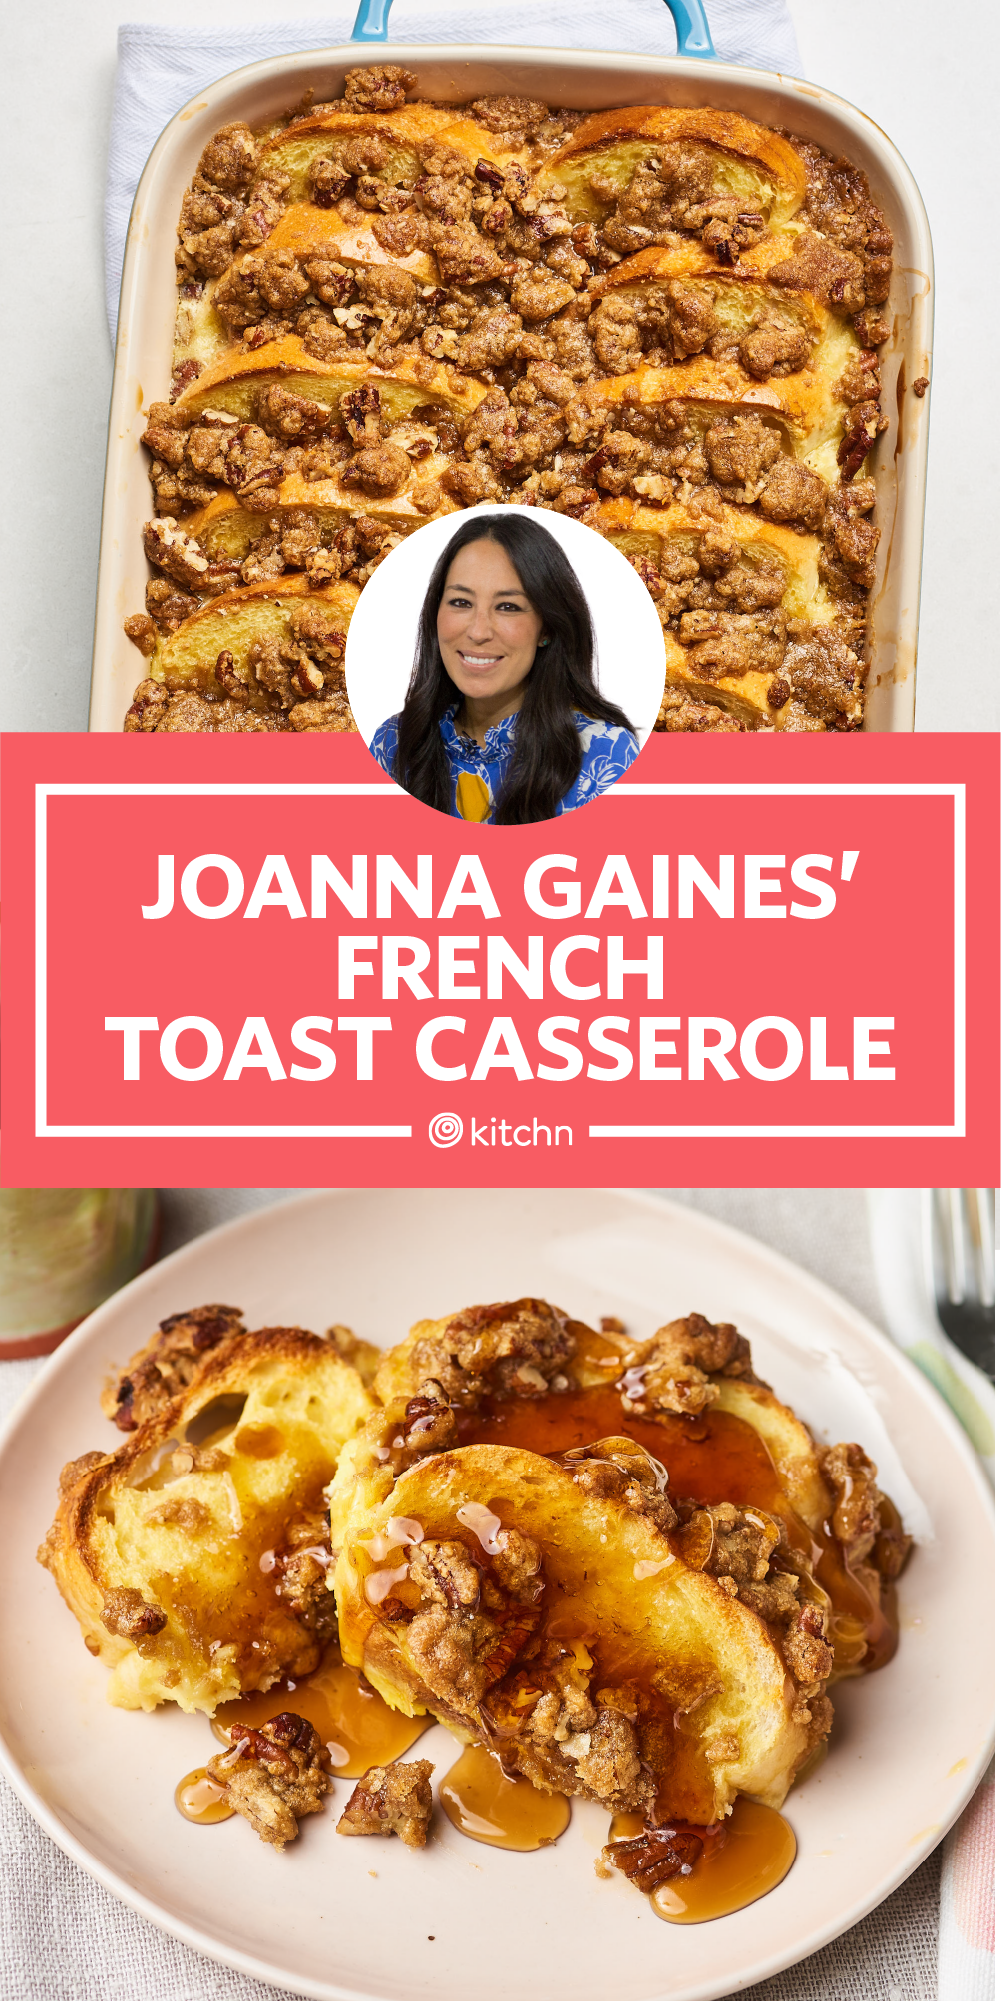 The Best Part of Joanna Gaines’ Overnight French Toast Is the Topping